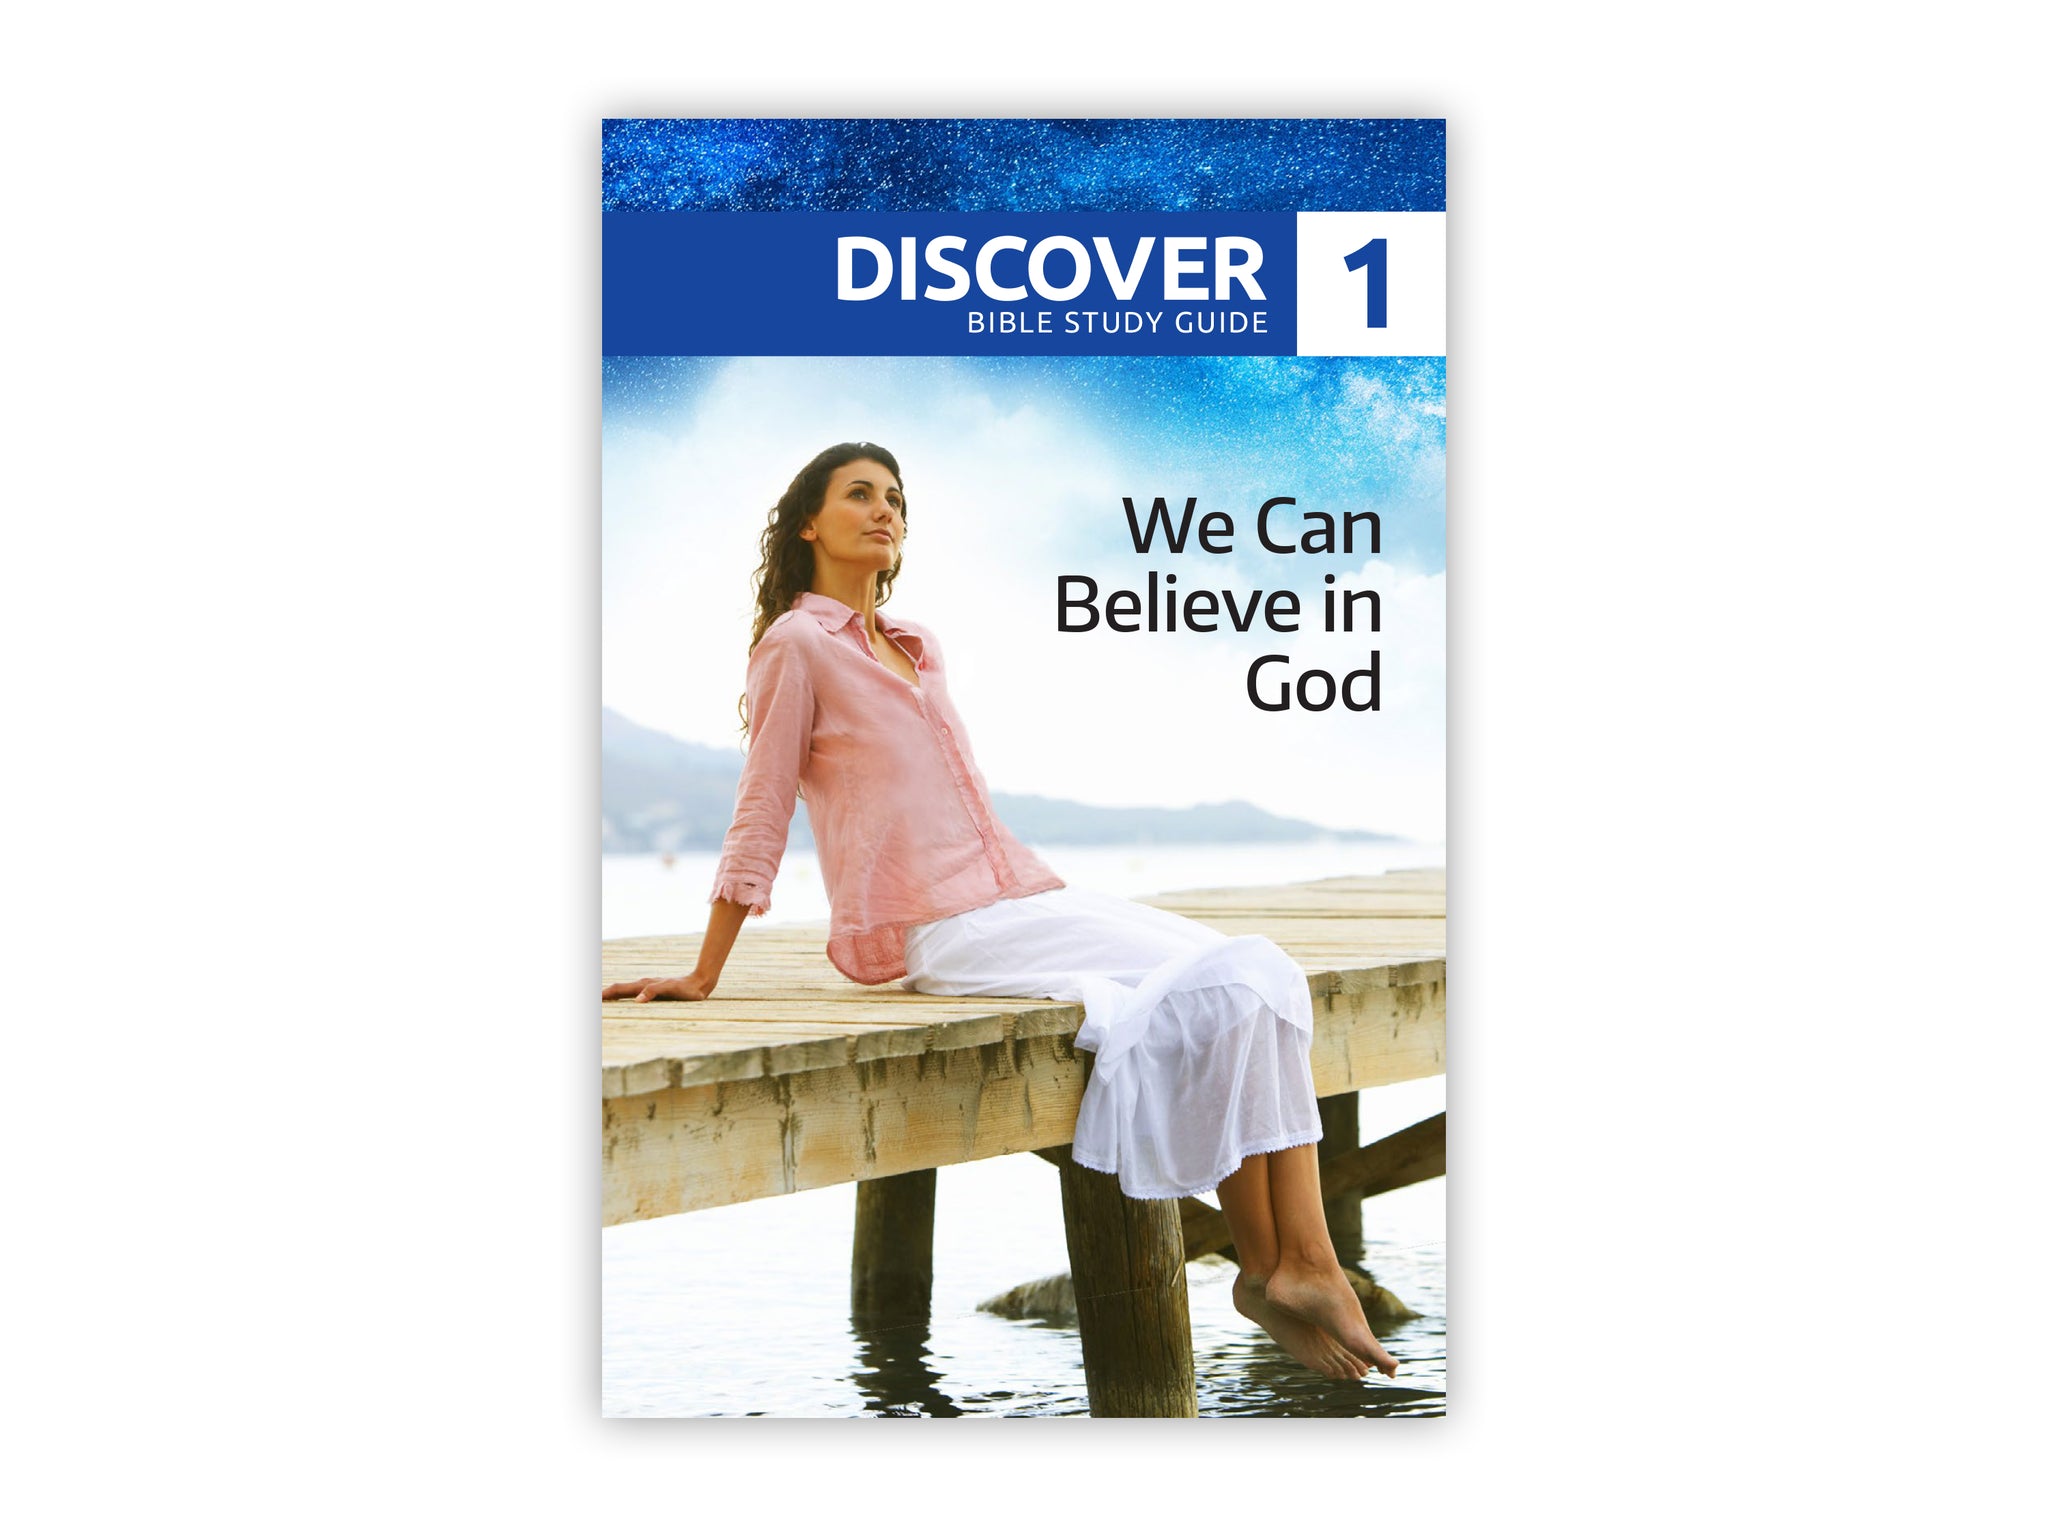 Discover Bible Study Guide #1 - We Can Believe in God